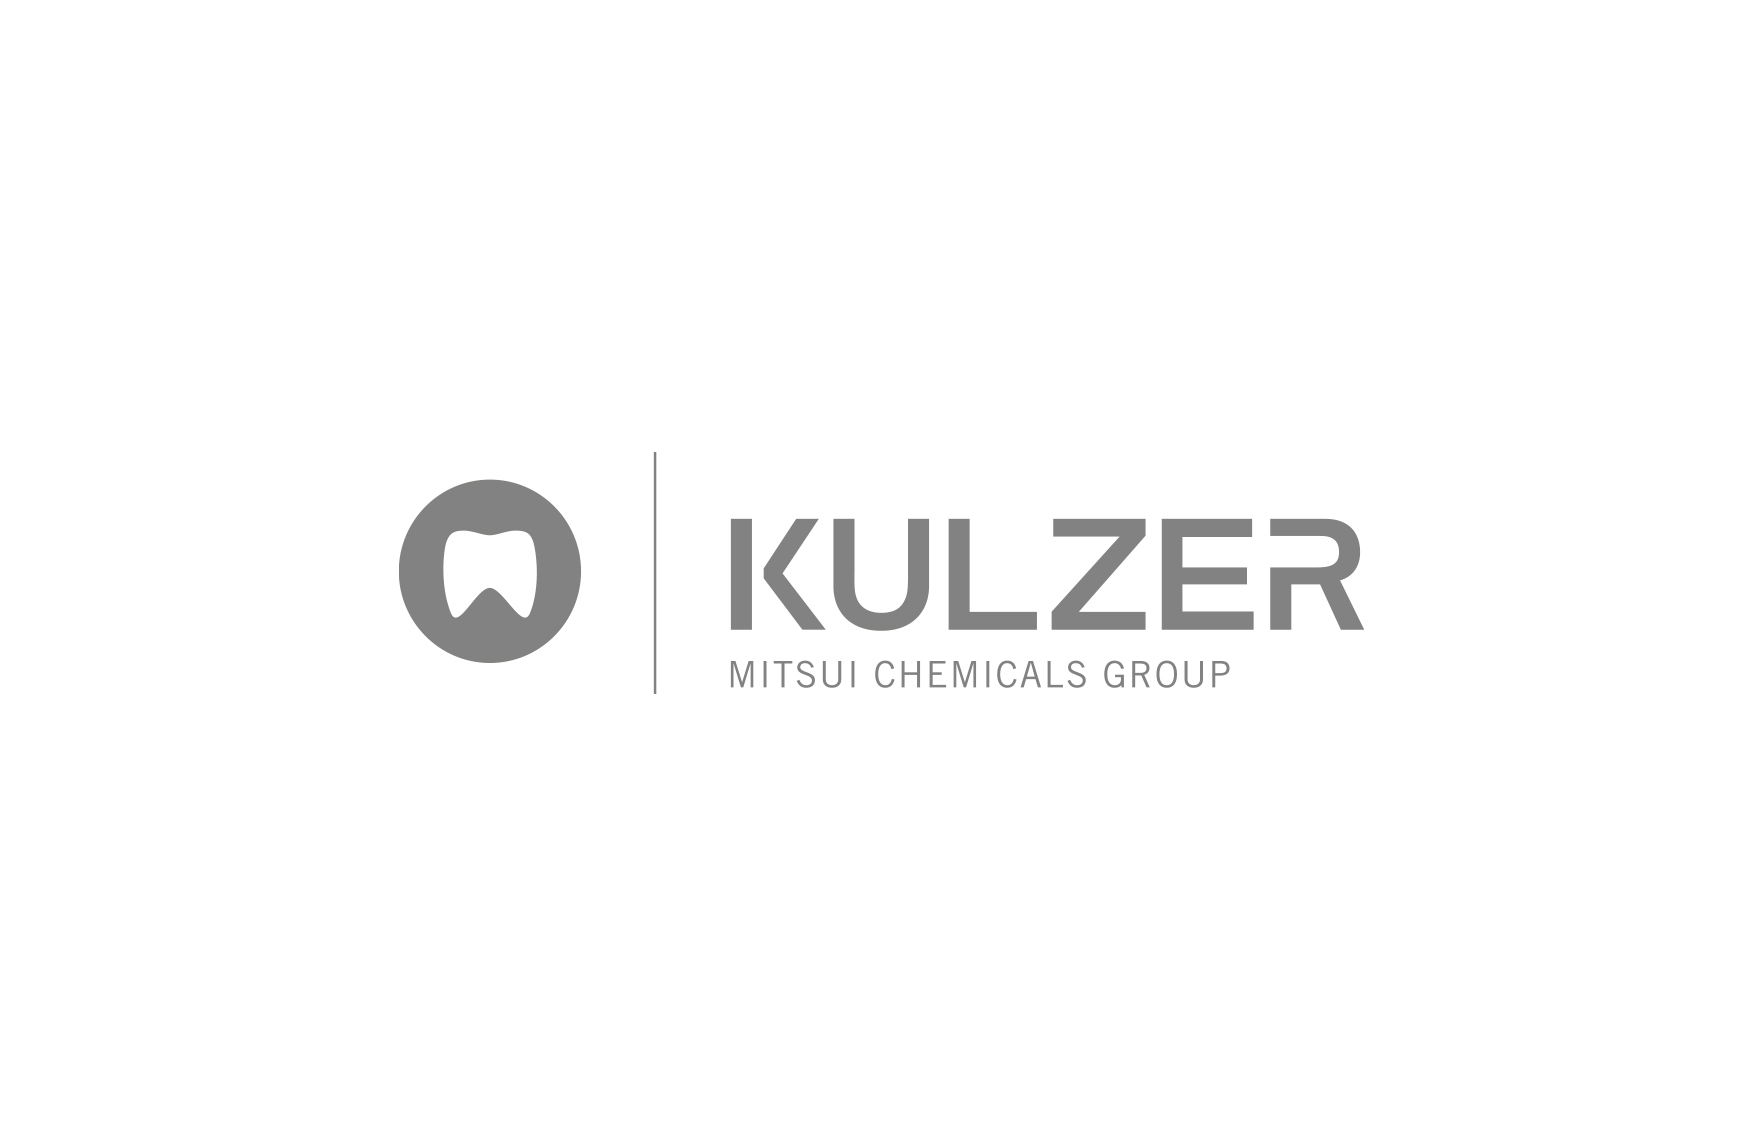 Shaping a new Brand: Kulzer Mitsui Chemicals Group